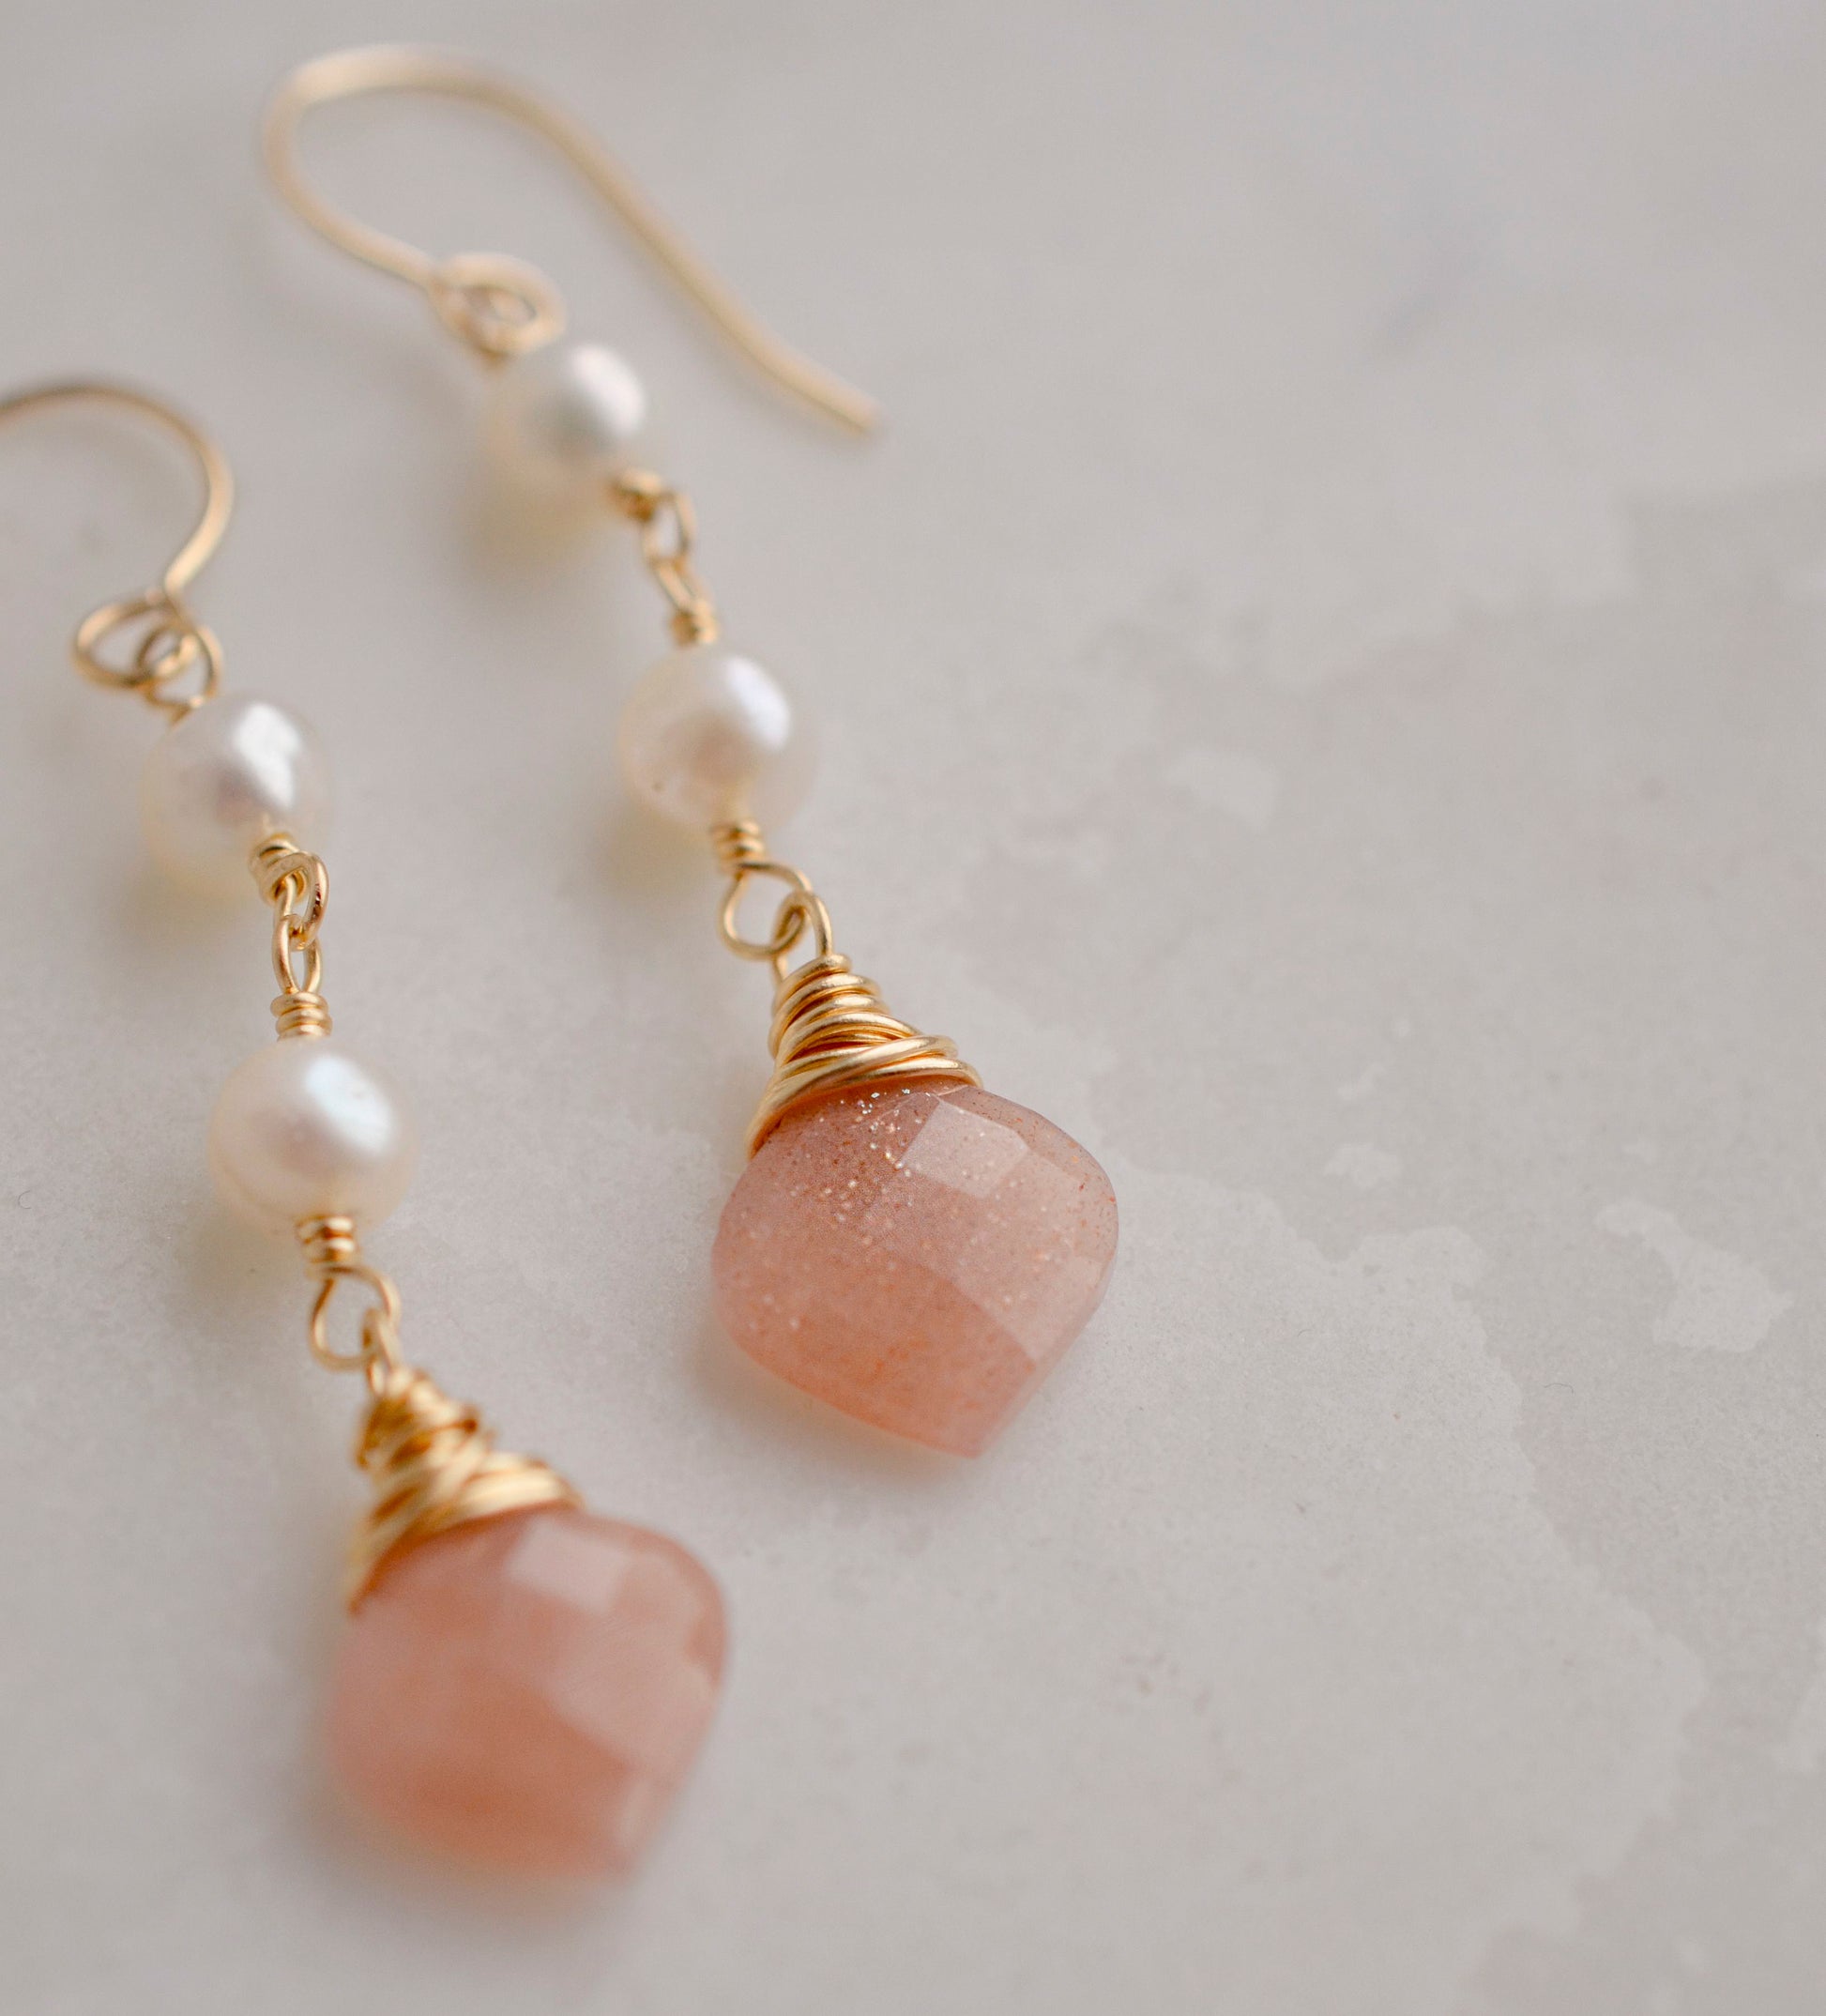 Two white semi-round pearls hang over natural peach Moonstone faceted drops. The gold style is shown.